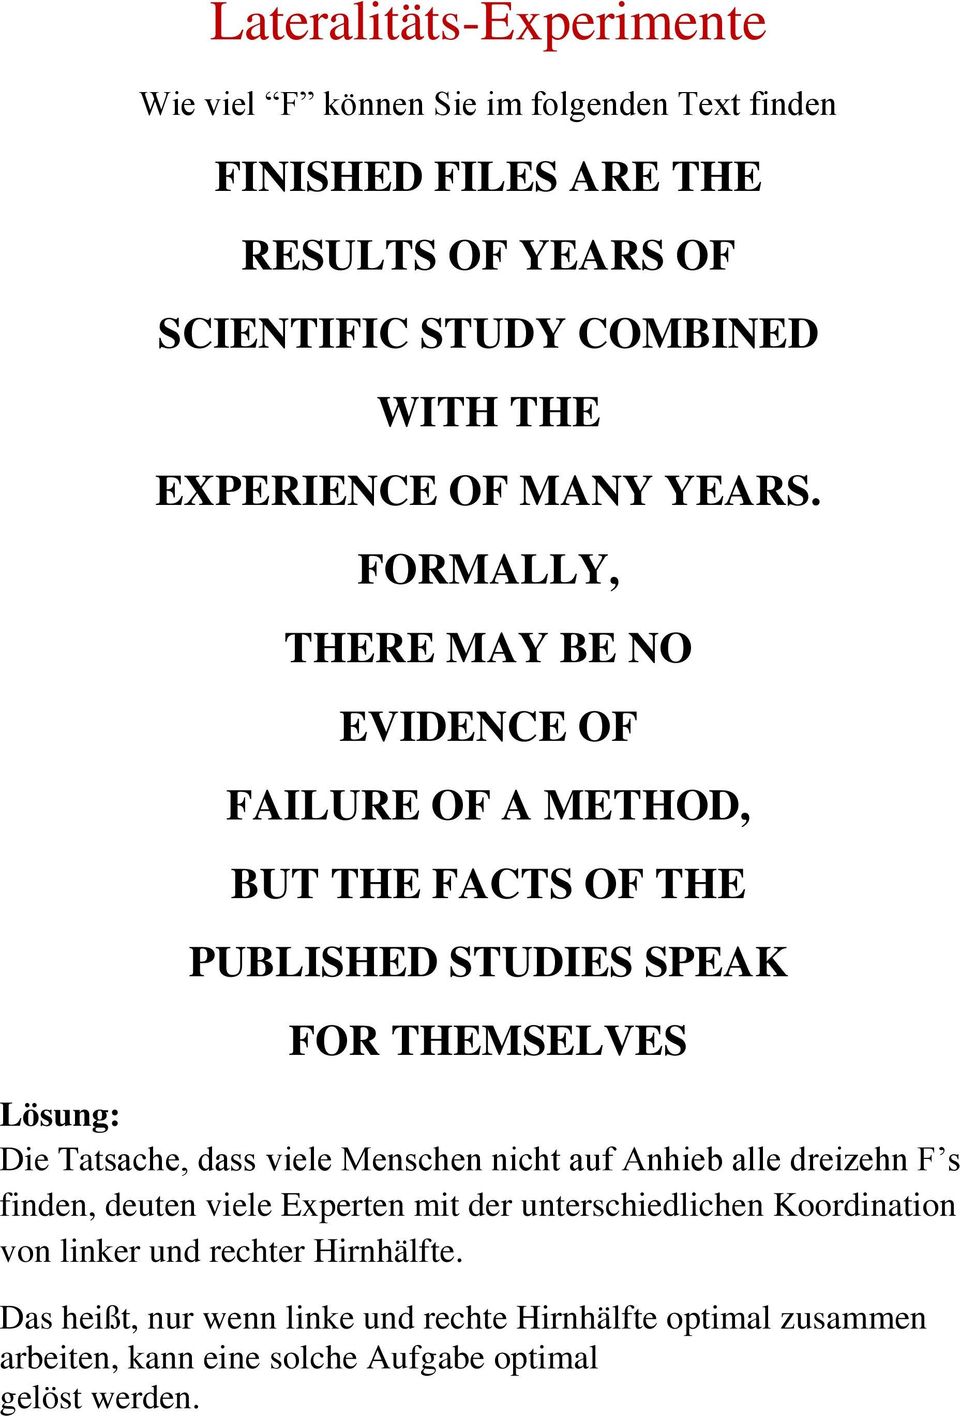 FORMALLY, THERE MAY BE NO EVIDENCE OF FAILURE OF A METHOD, BUT THE FACTS OF THE PUBLISHED STUDIES SPEAK FOR THEMSELVES Lösung: Die Tatsache, dass